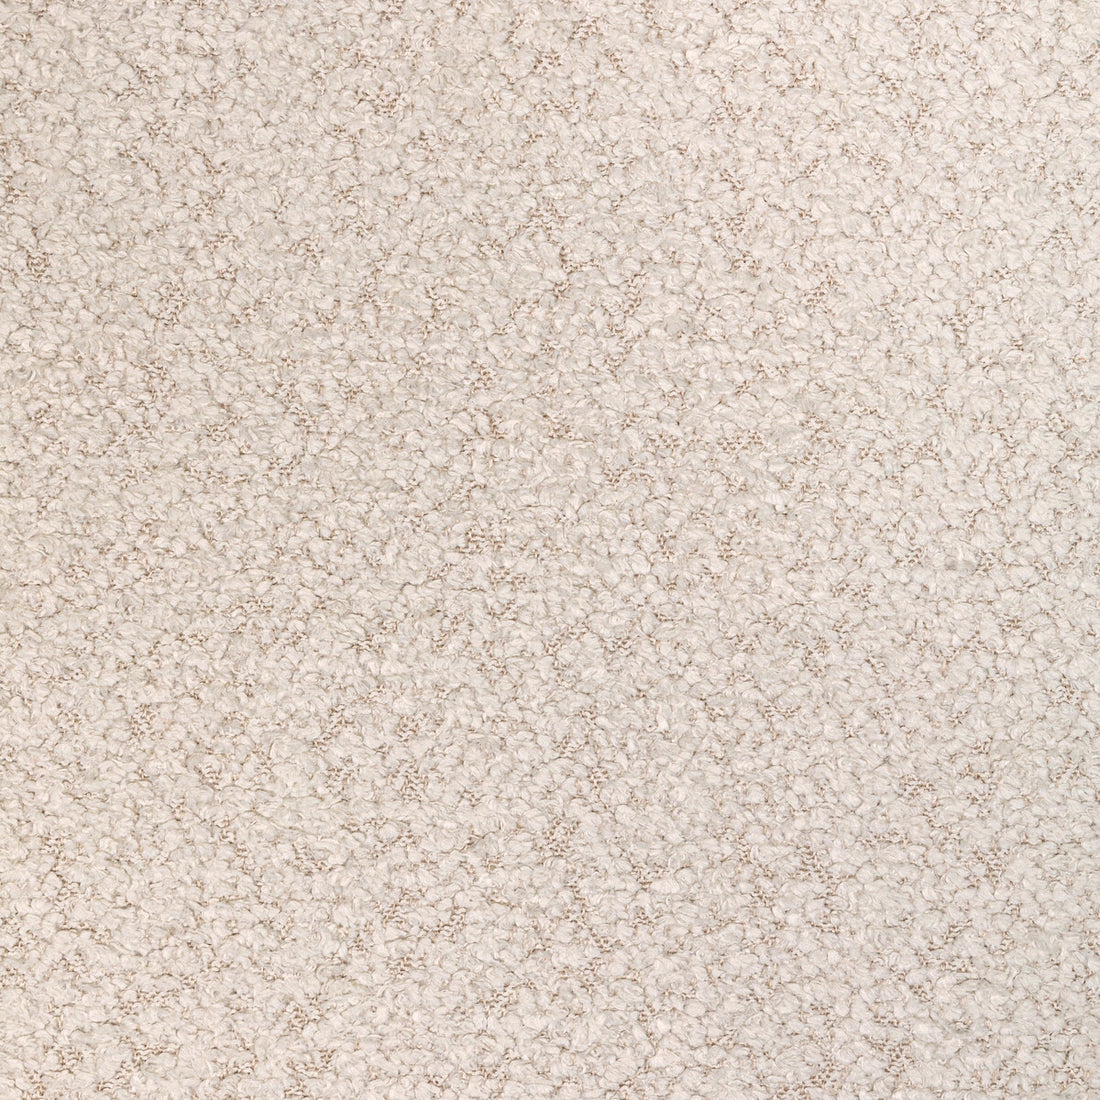 Marino fabric in sand dollar color - pattern 36746.1.0 - by Kravet Contract in the Refined Textures Performance Crypton collection